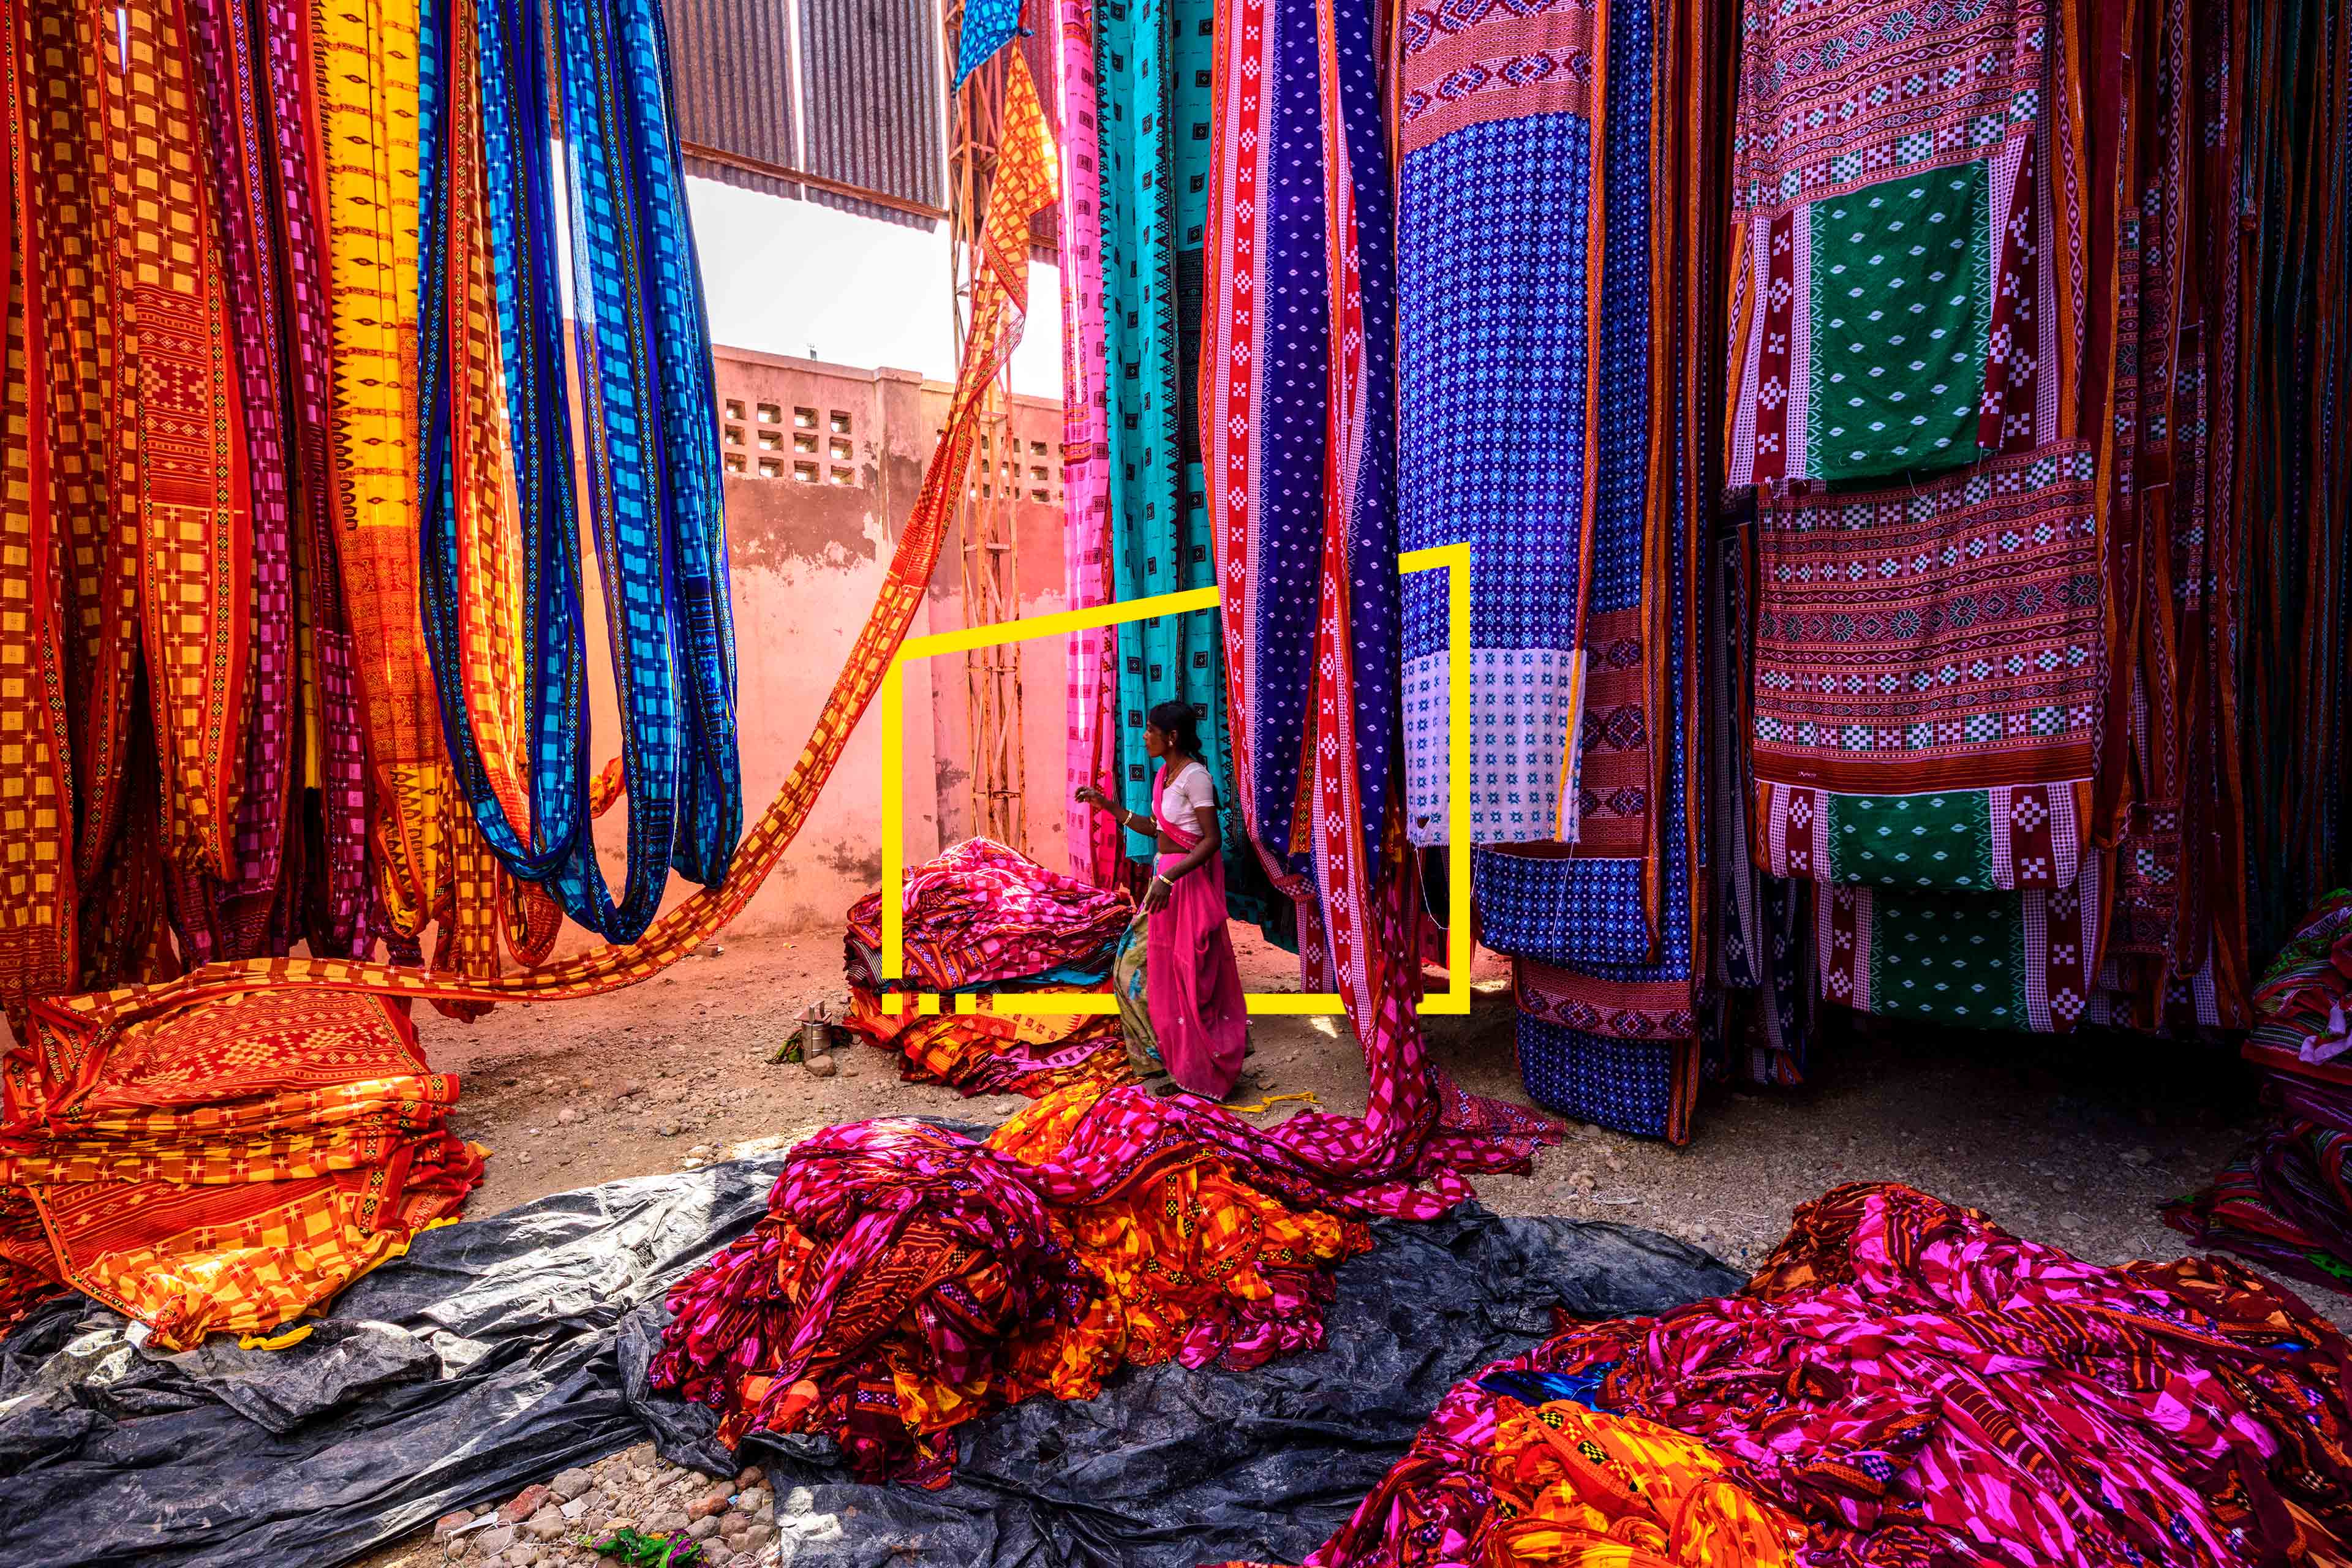 Woman textile industry pali rajasthan india image